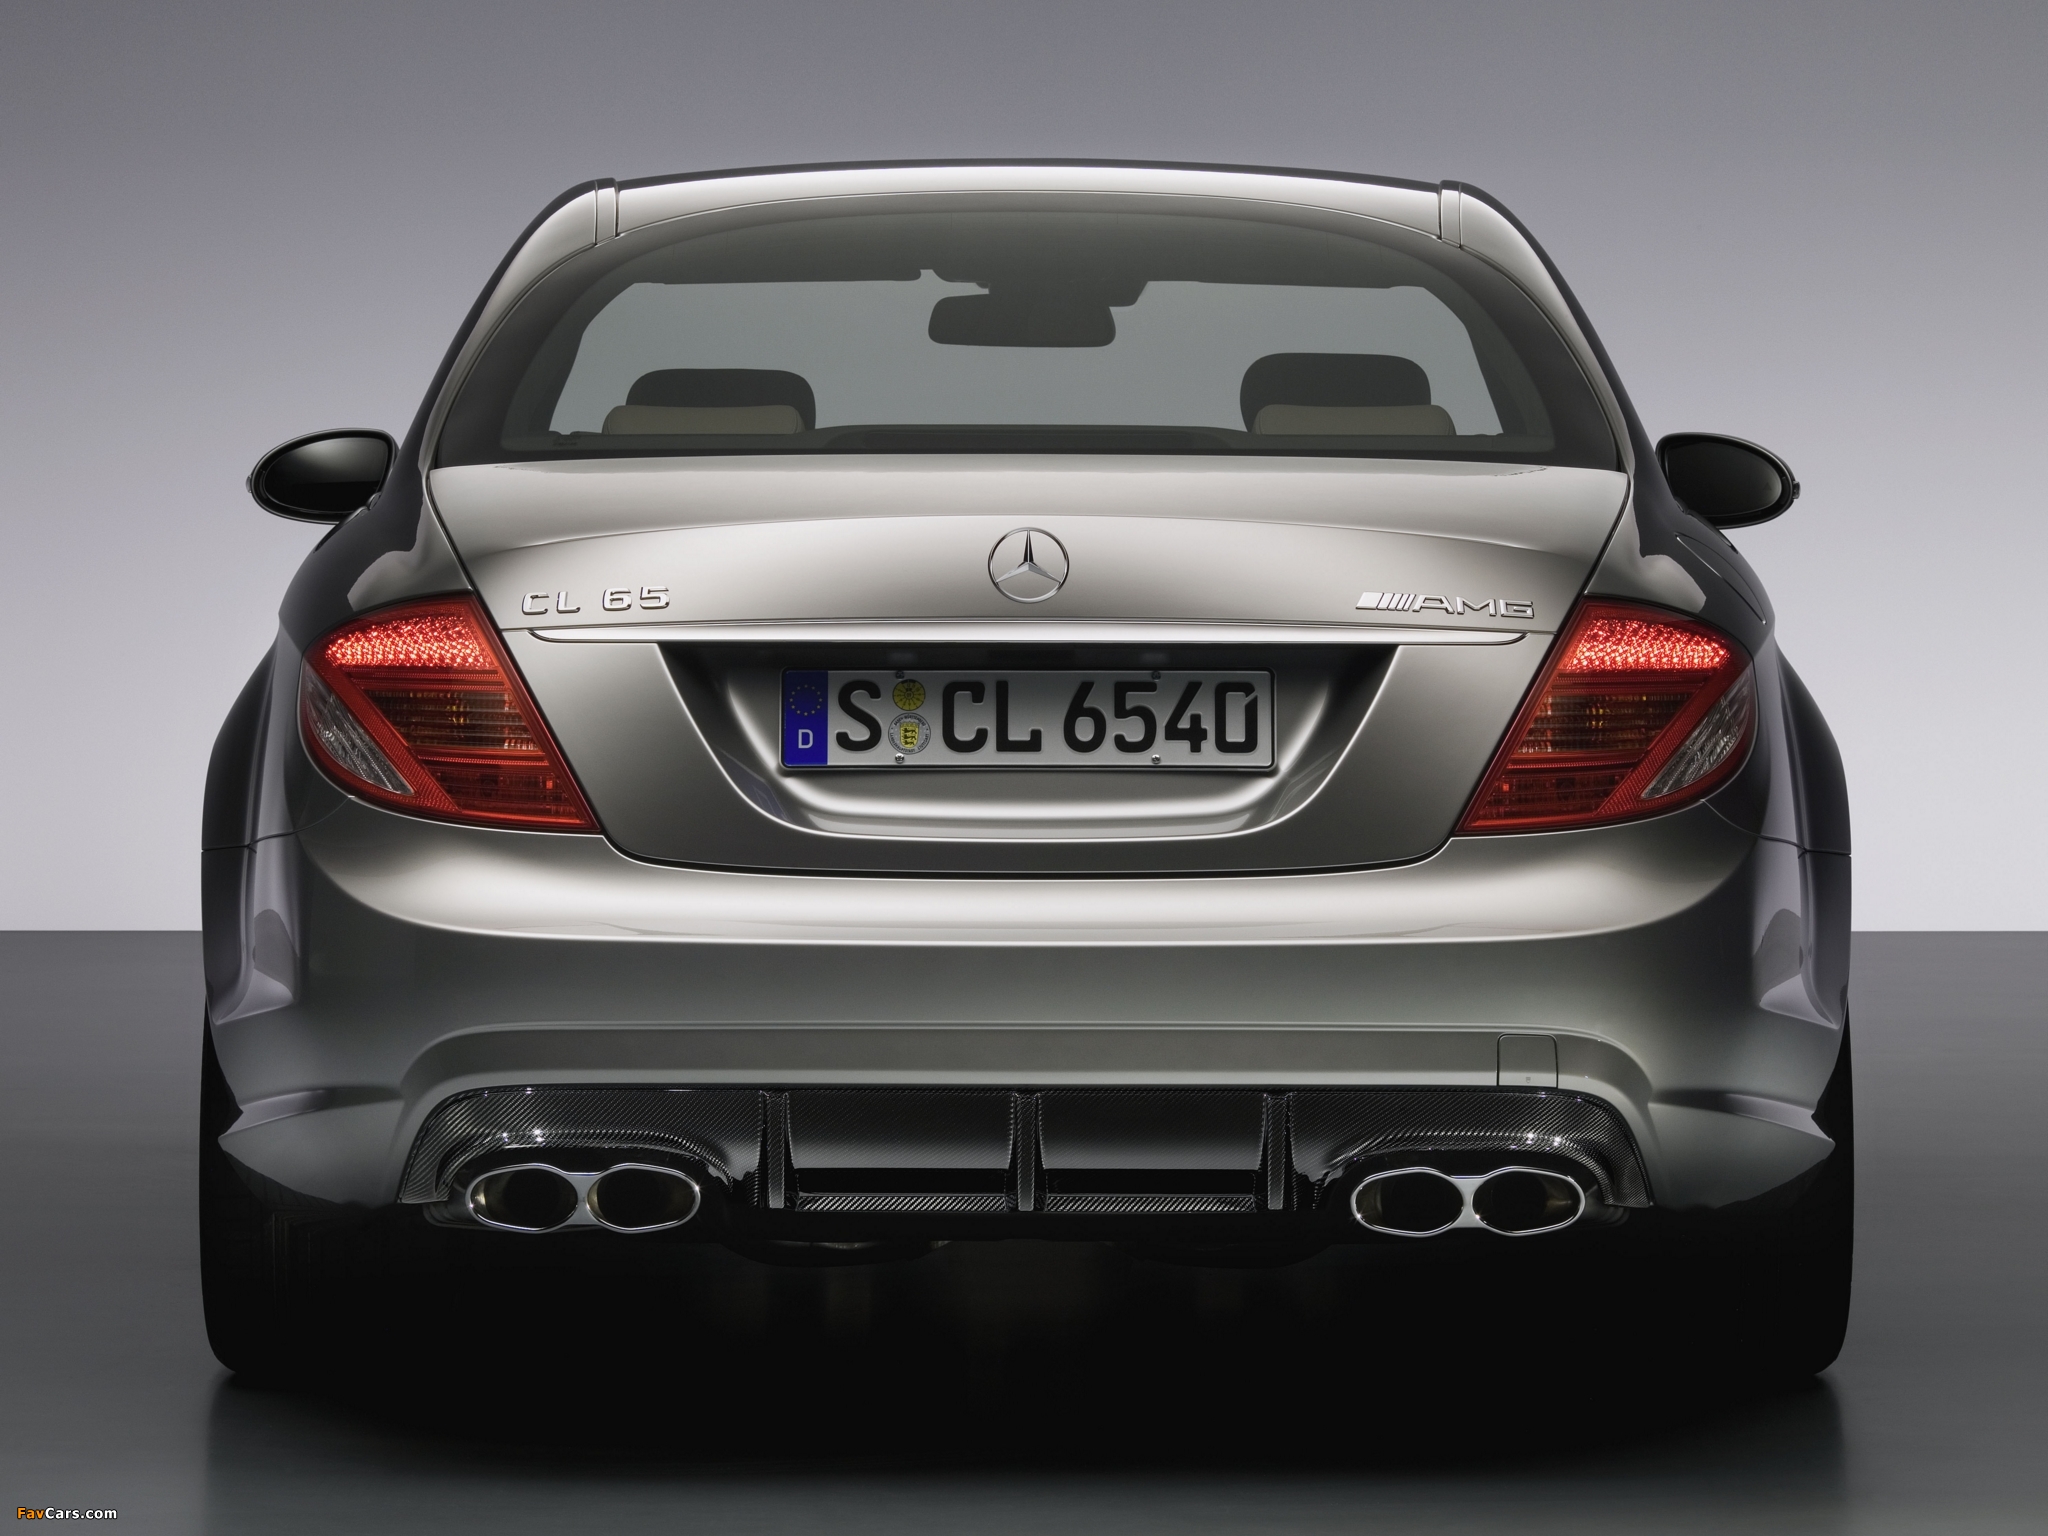 Mercedes-Benz CL 65 AMG 40th Anniversary (C216) 2007 images (2048 x 1536)